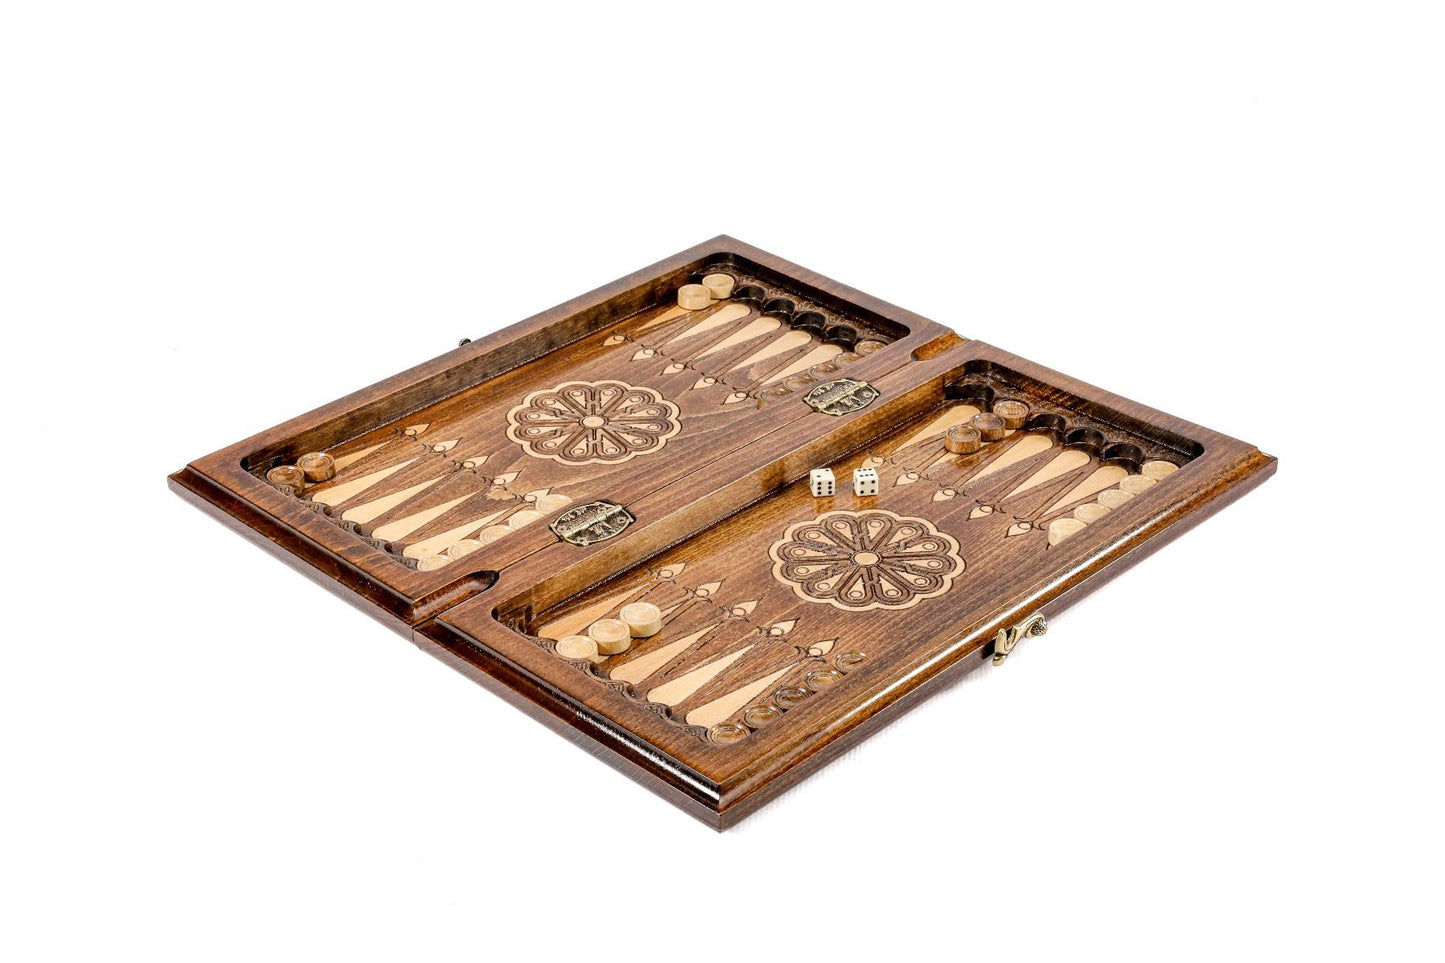 Master two classic games with a luxury set that blends the rich texture of handcrafted artistry with timeless gameplay.